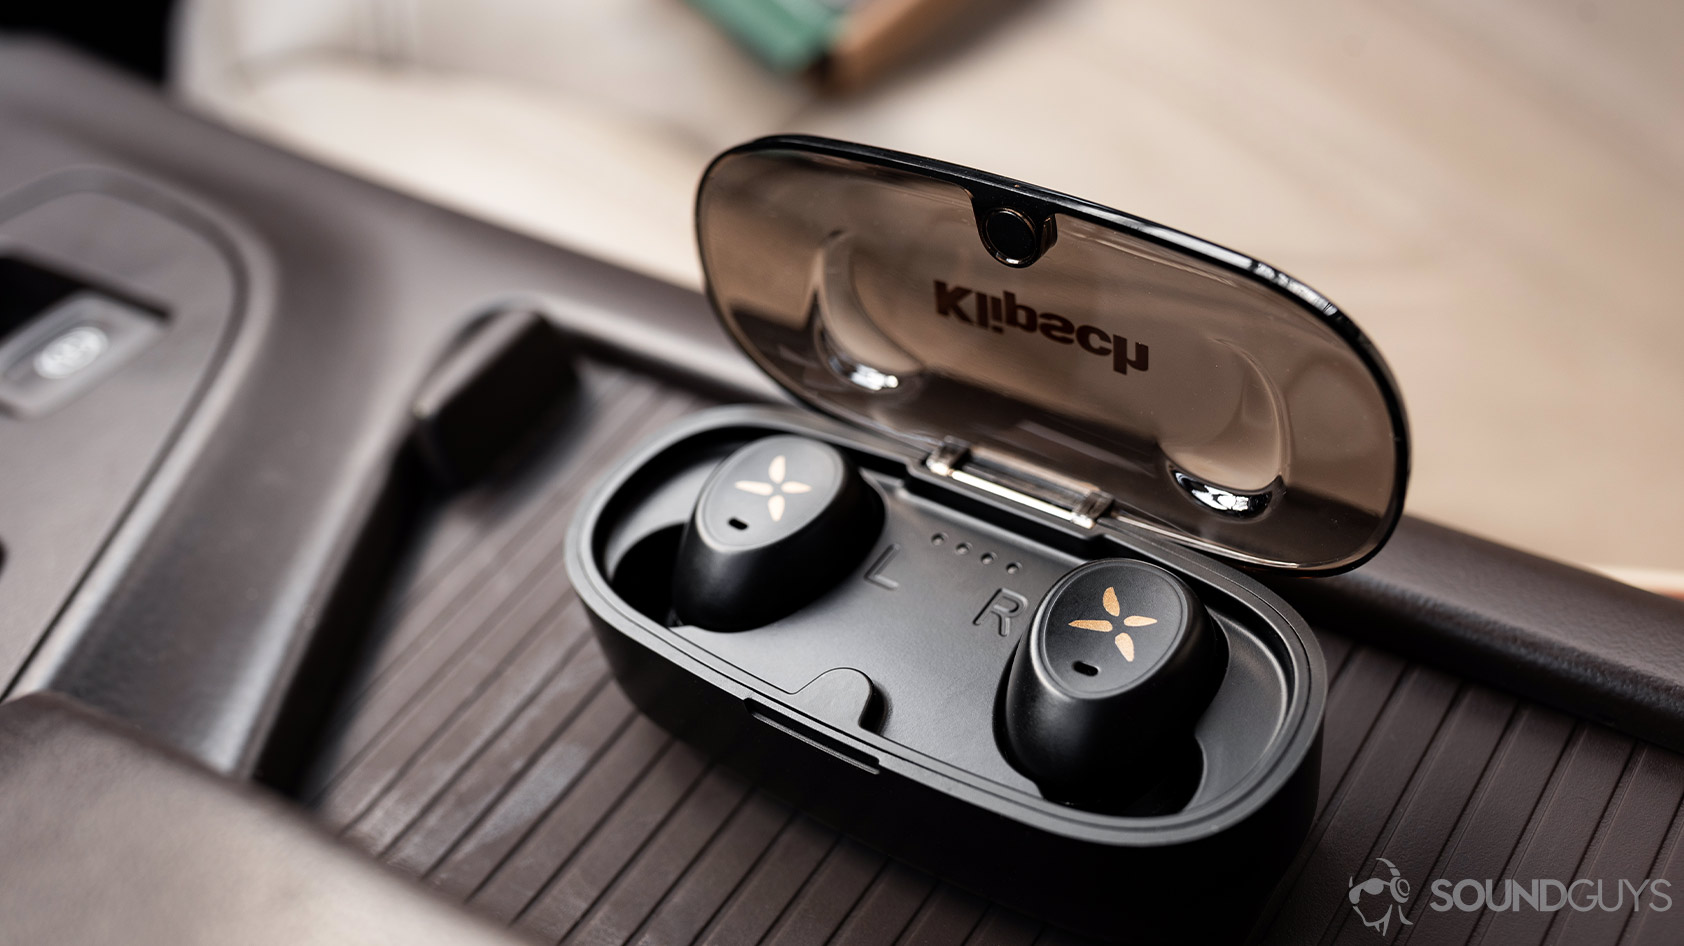 A picture of the Klipsch S1 True Wireless earbuds in the microUSB charging case with the lid flipped open.